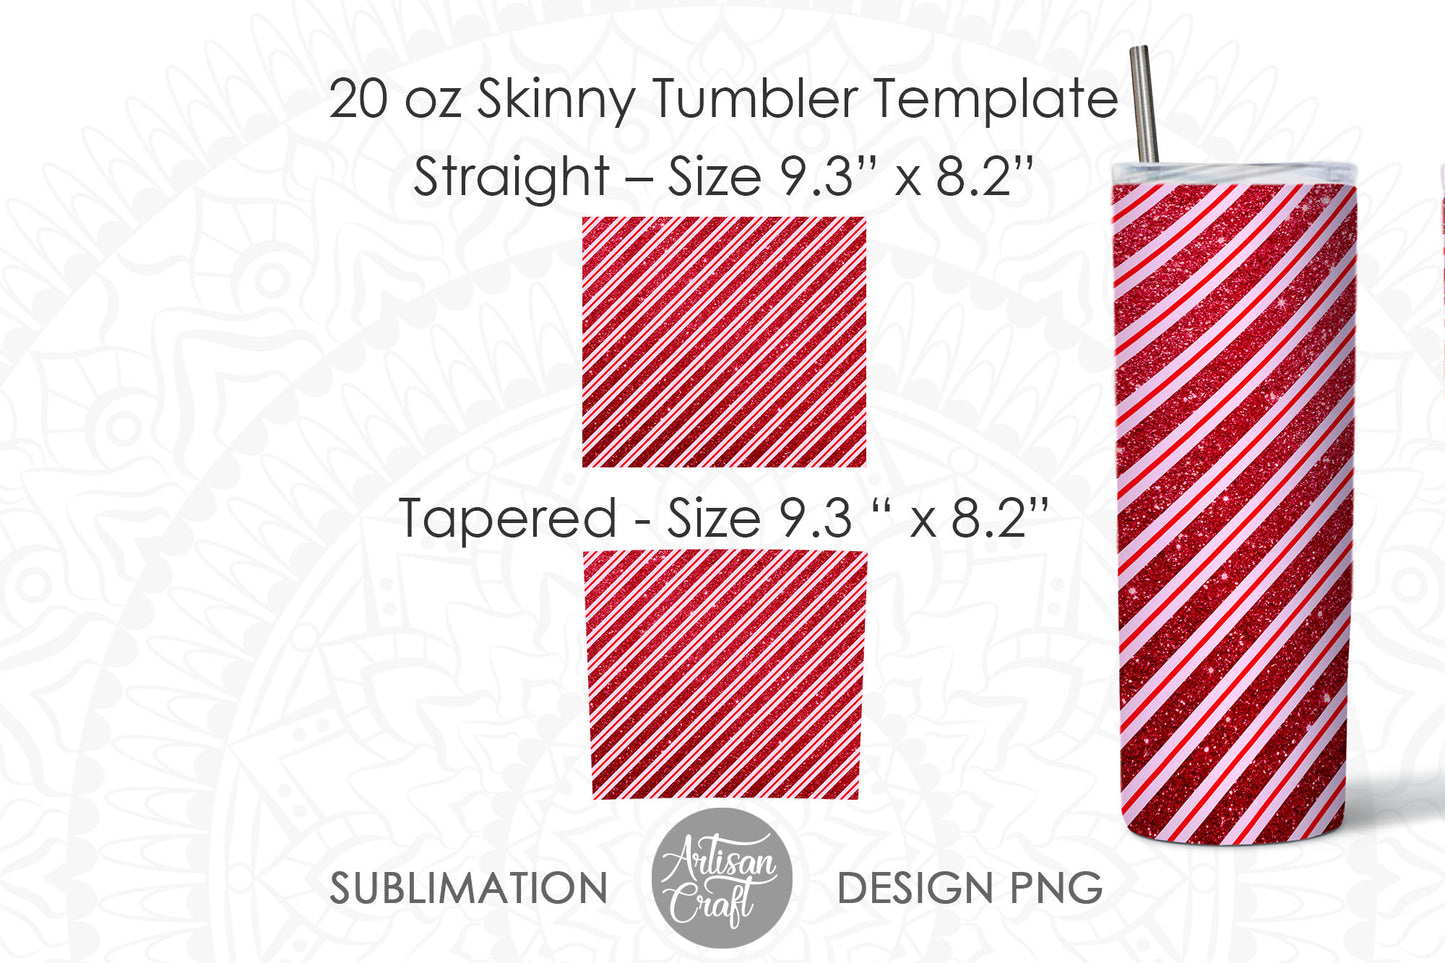 Christmas candy cane PNG bundle in red color